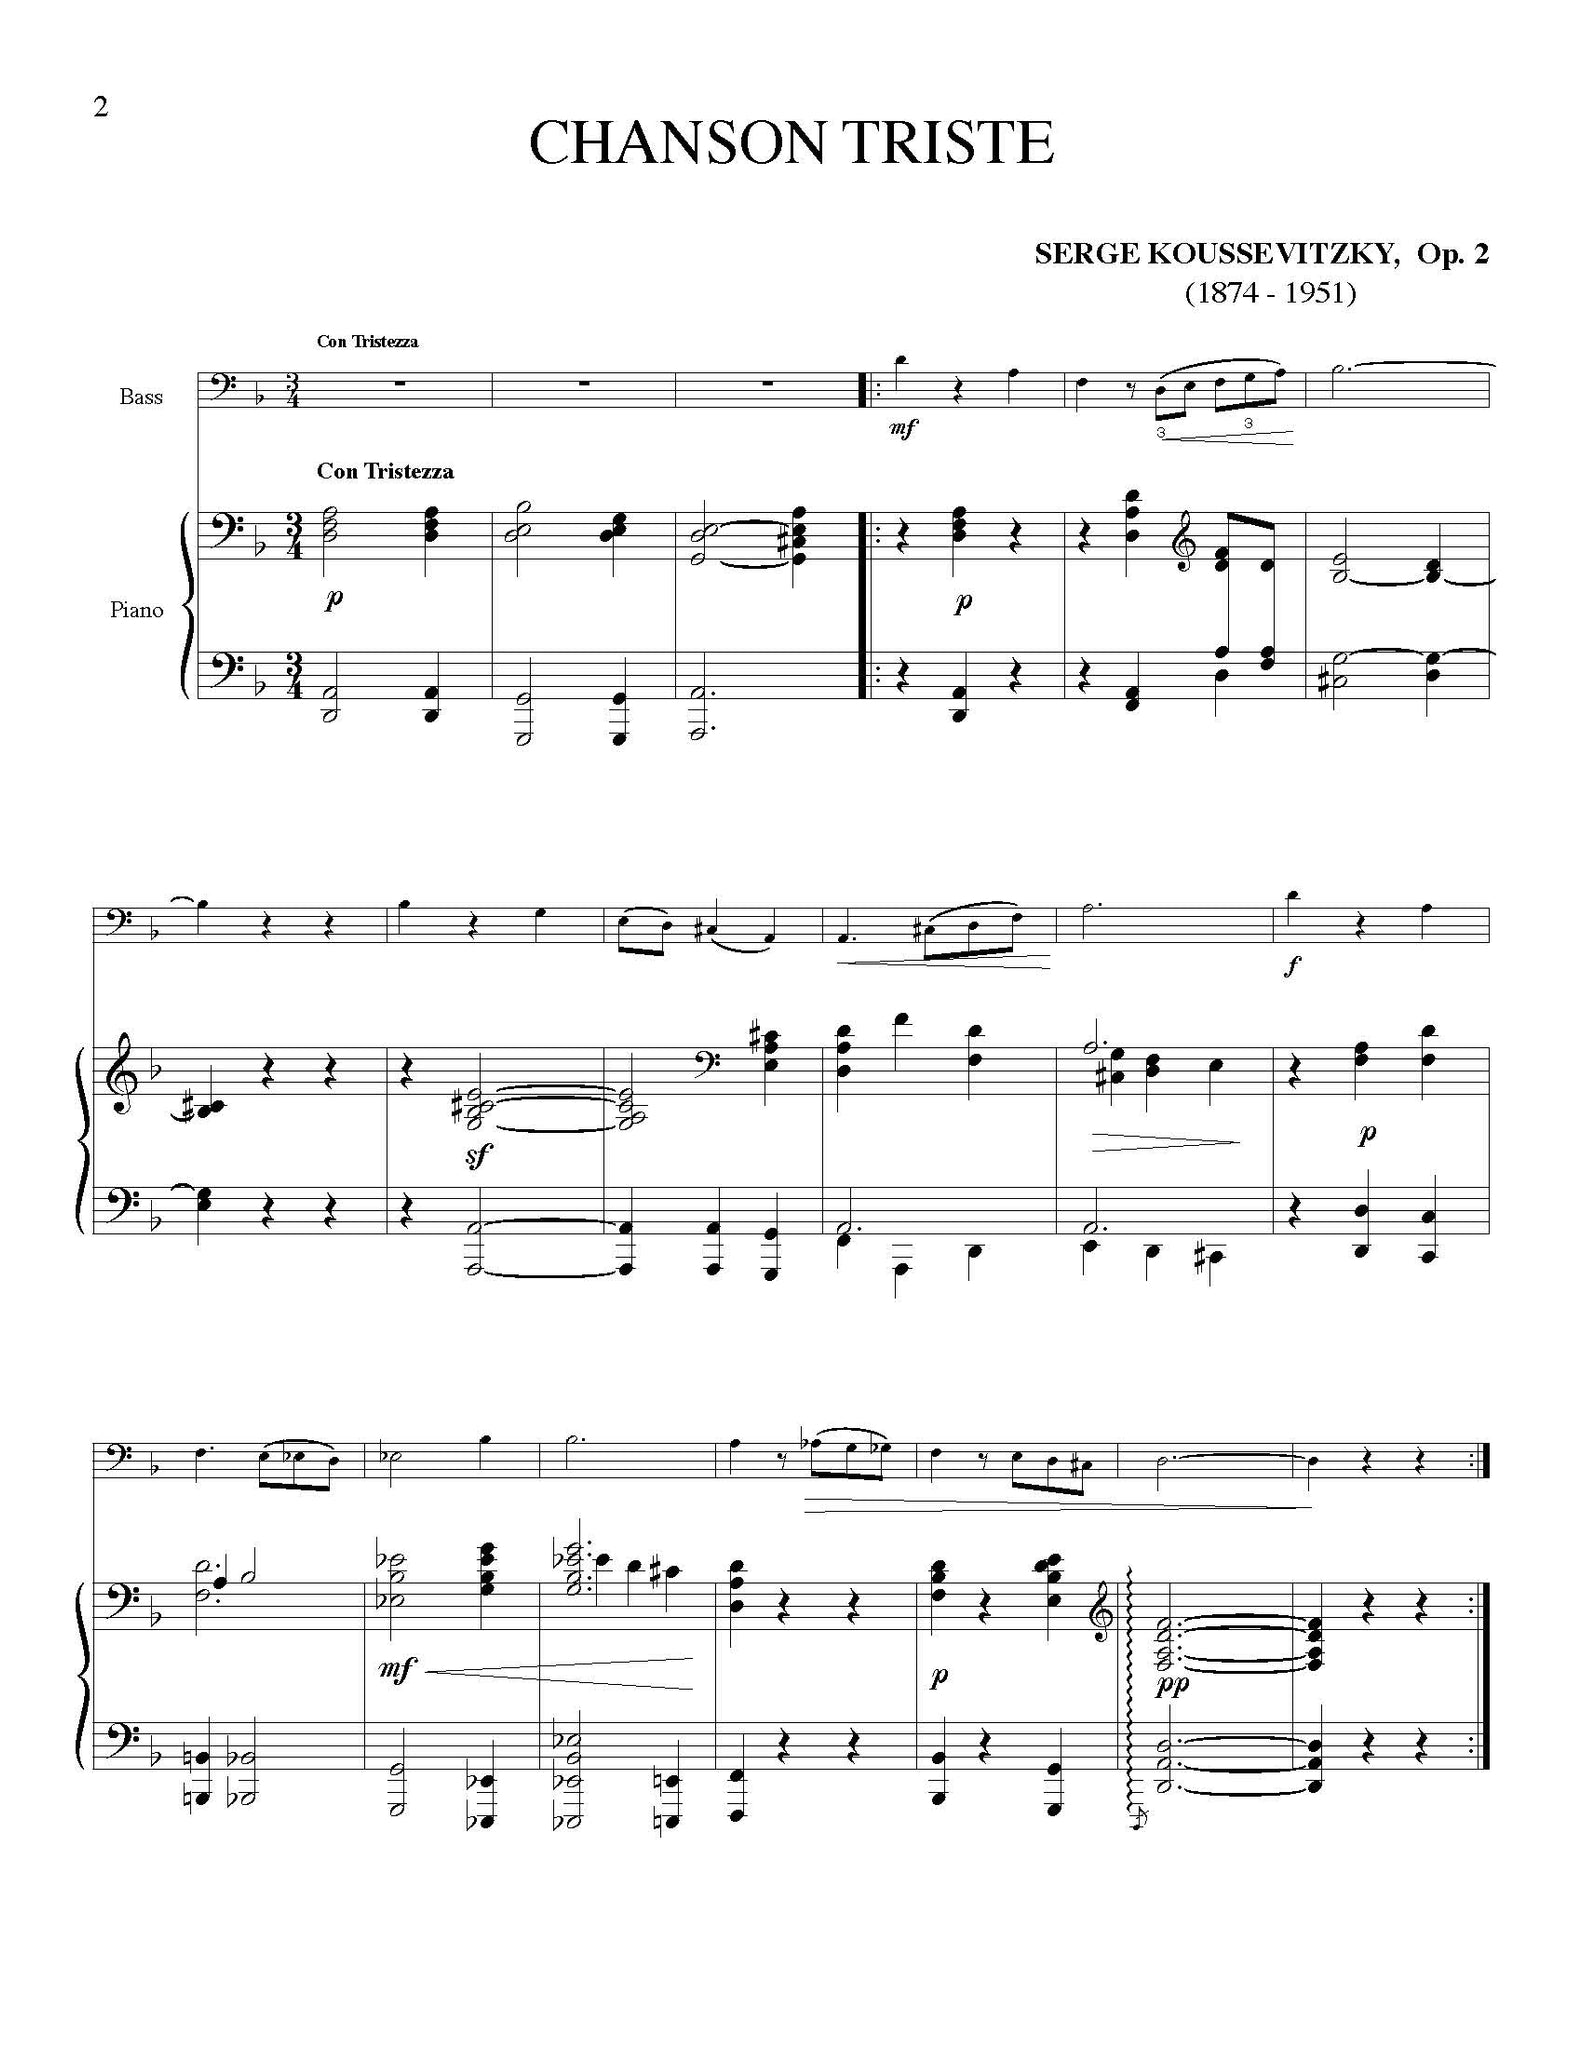 Koussevitzky Chanson Triste orchestra tuning page 1